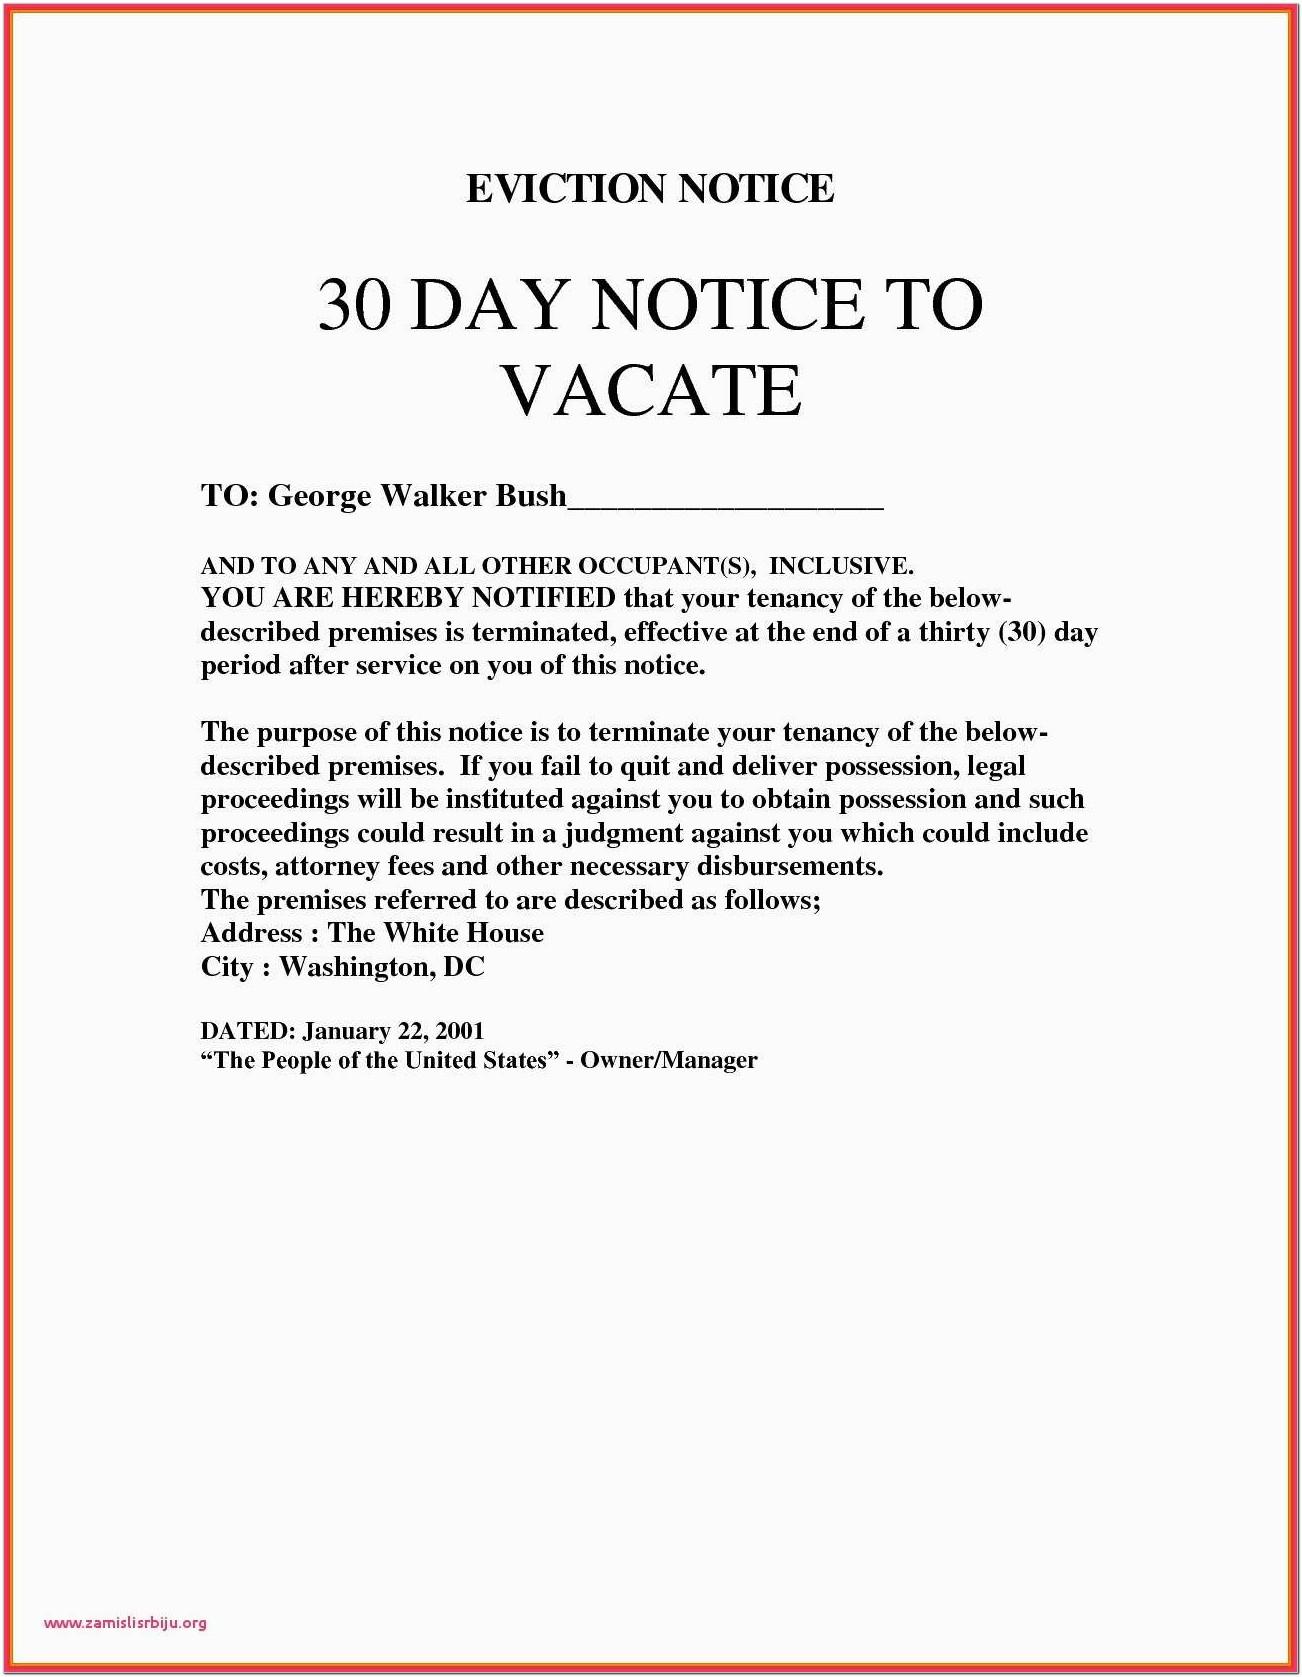 3 Day Eviction Notice California Form